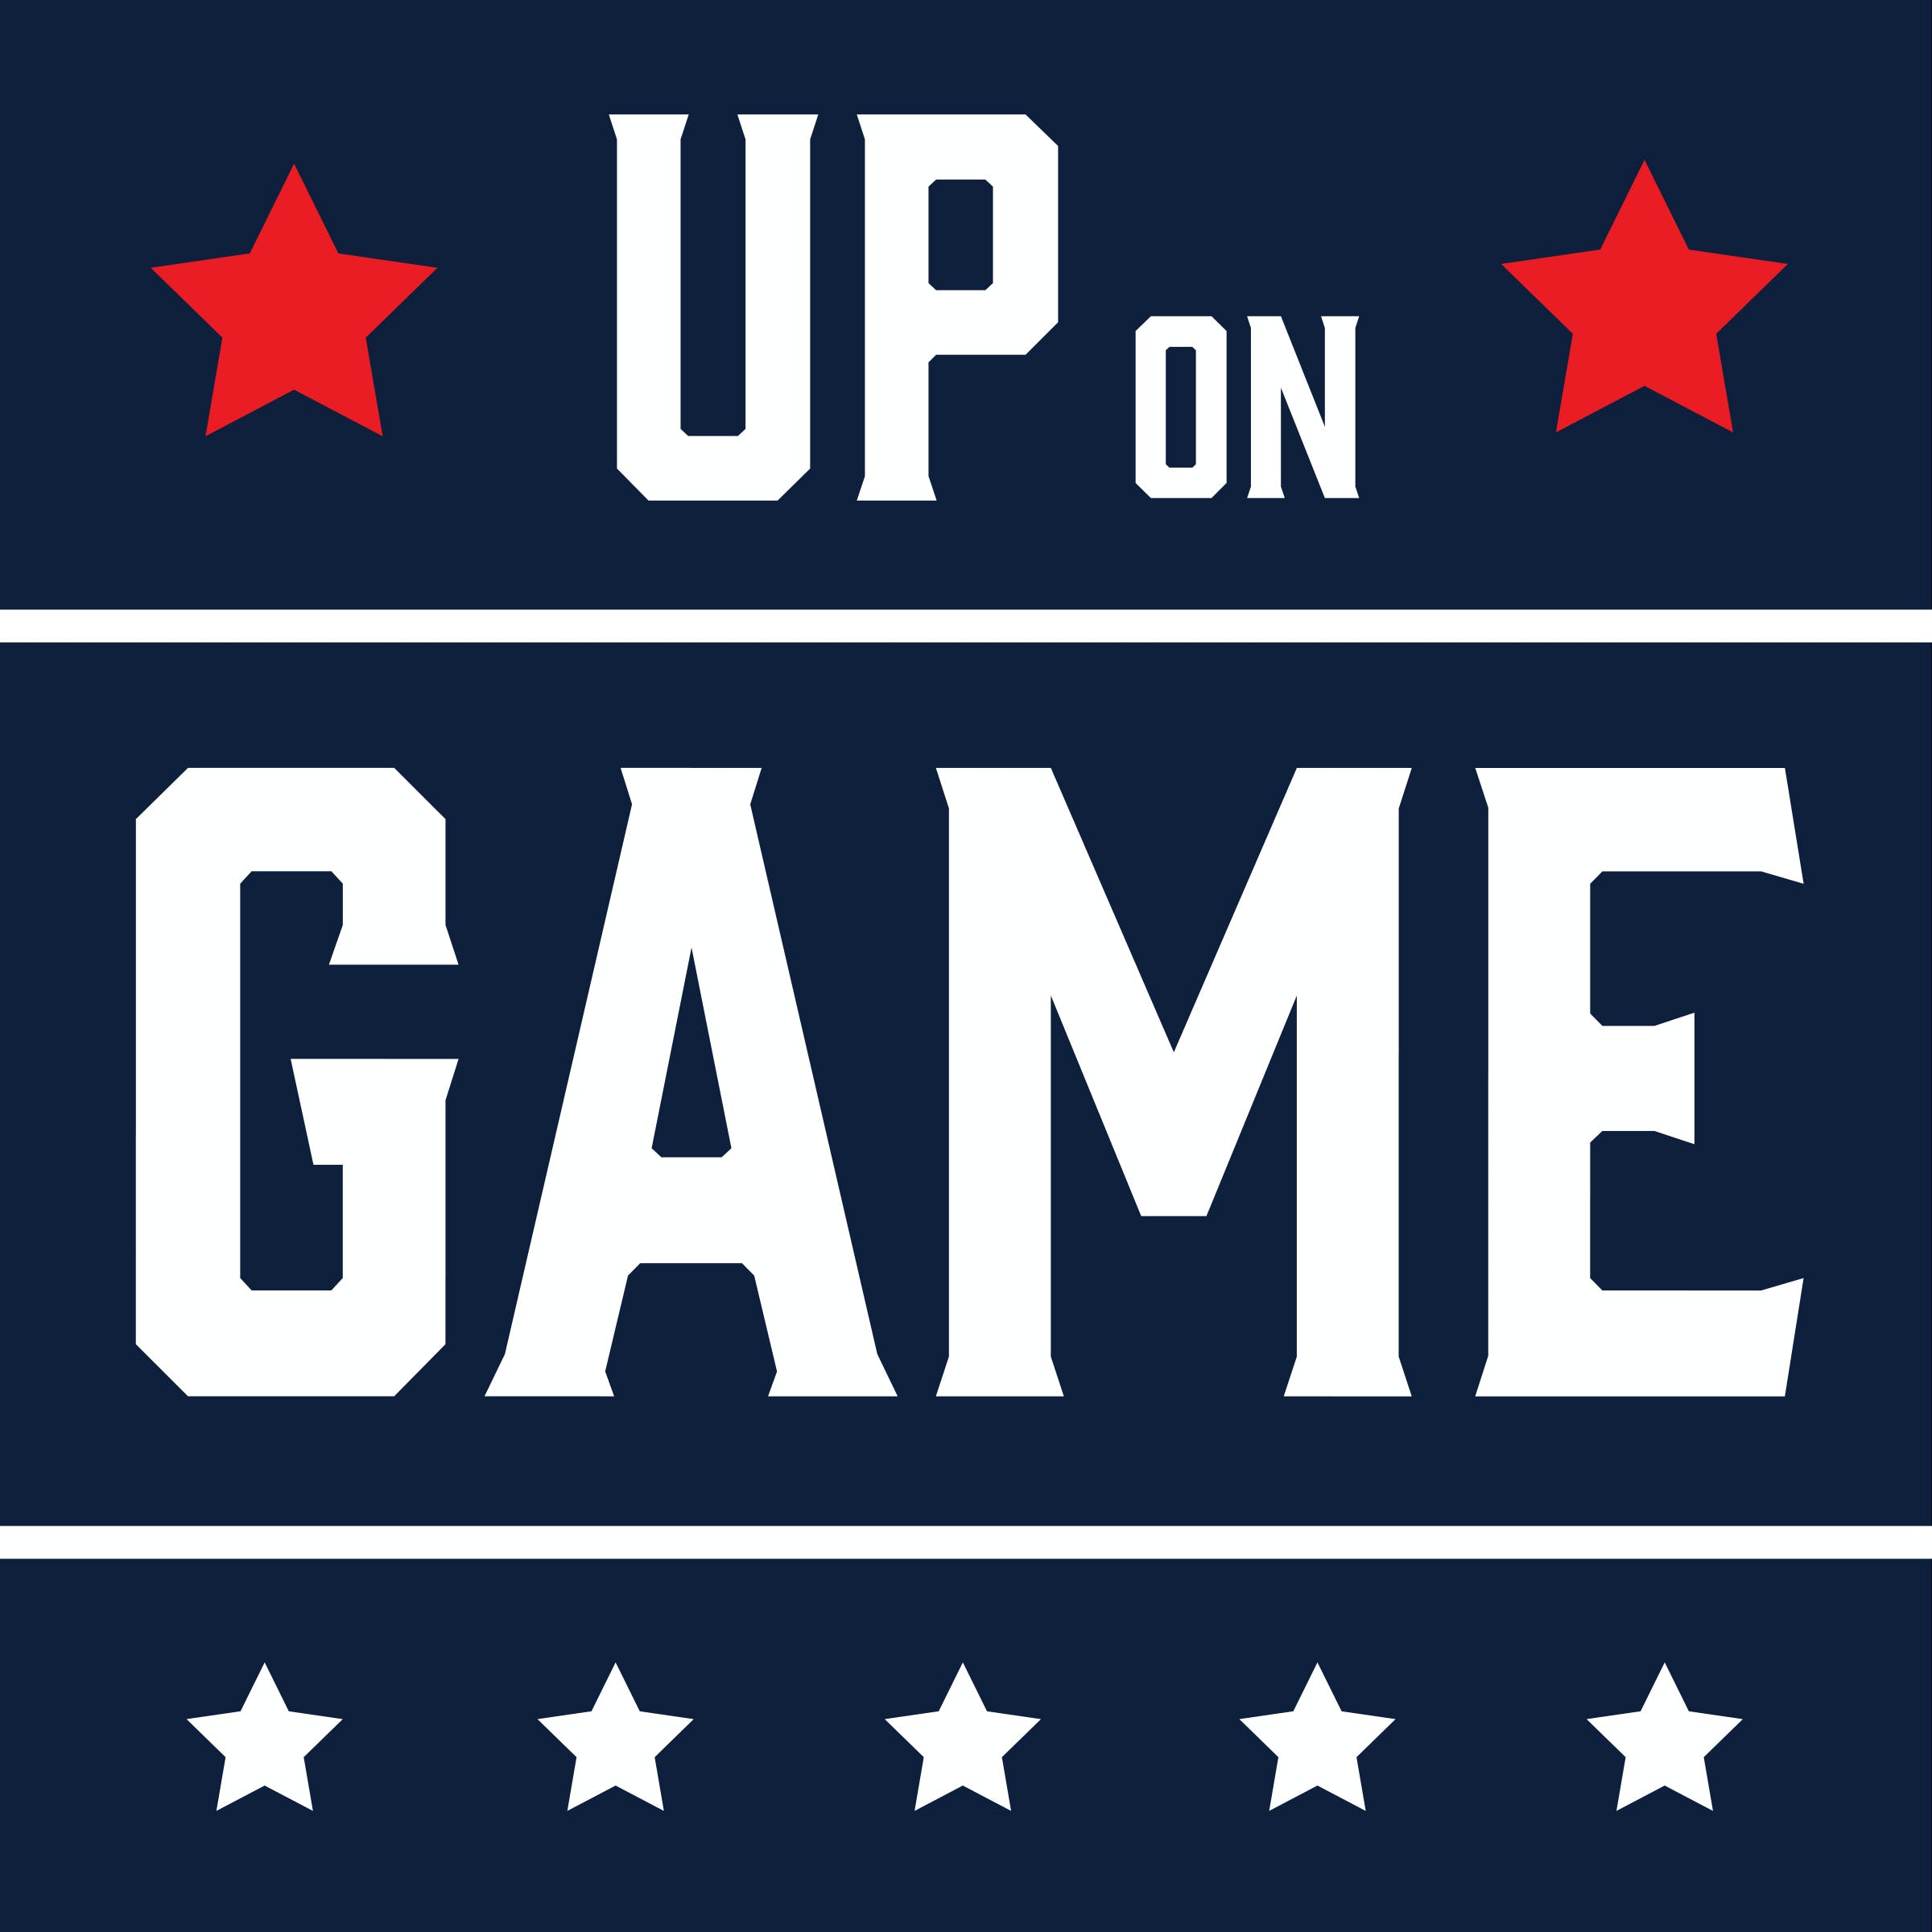 Up on Game: Hour 2 – Florida State, Las Vegas Raiders, and more!